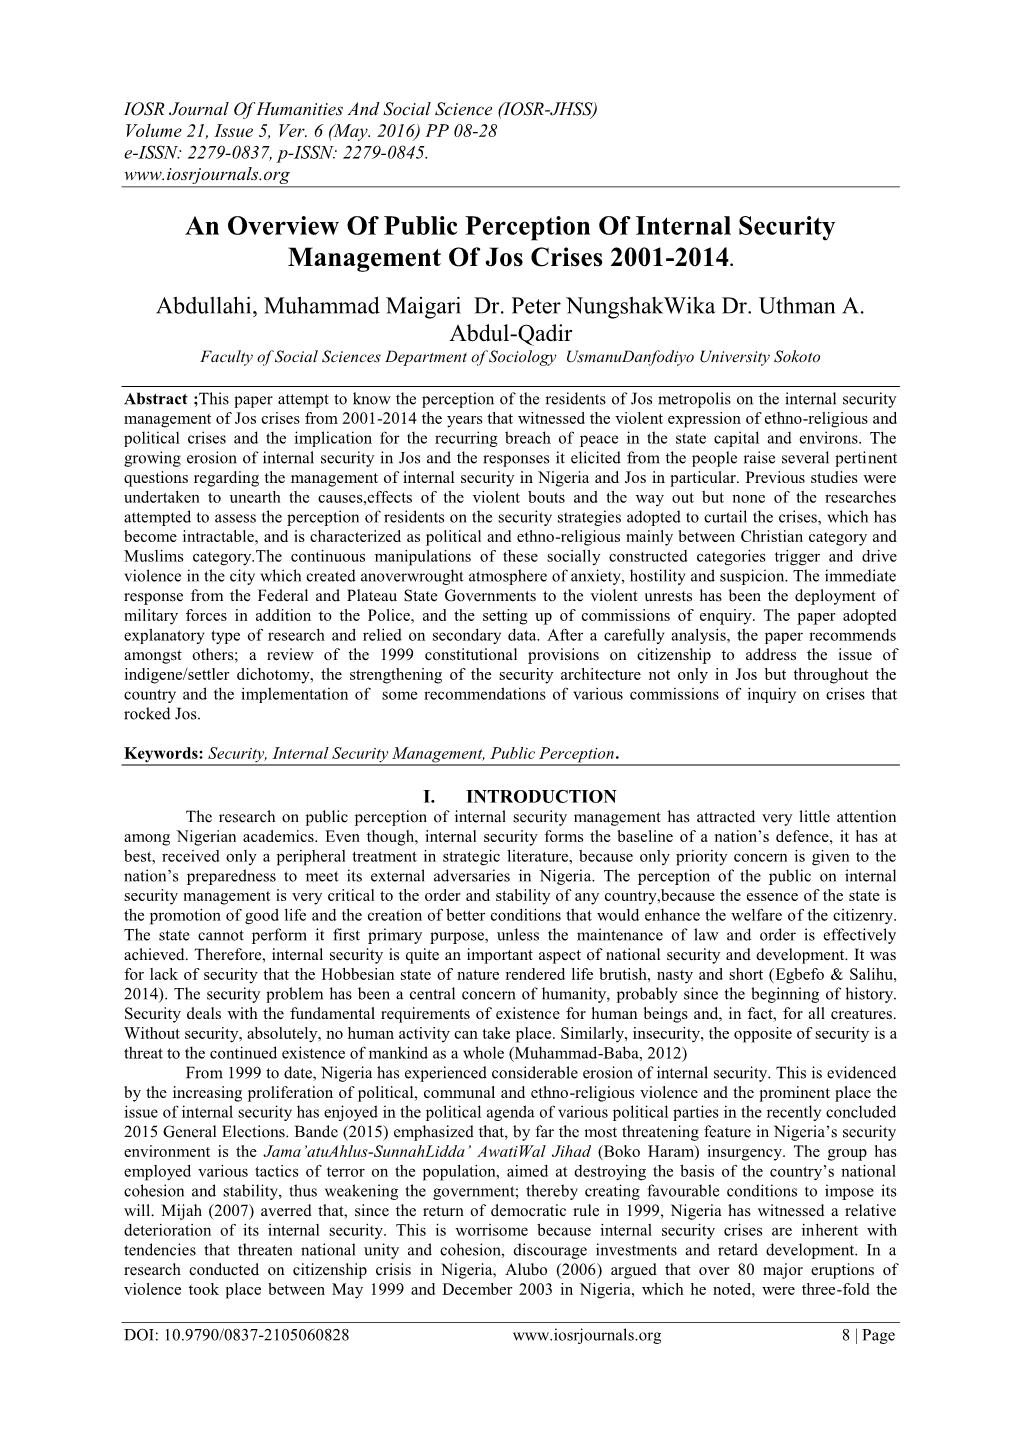 An Overview of Public Perception of Internal Security Management of Jos Crises 2001-2014